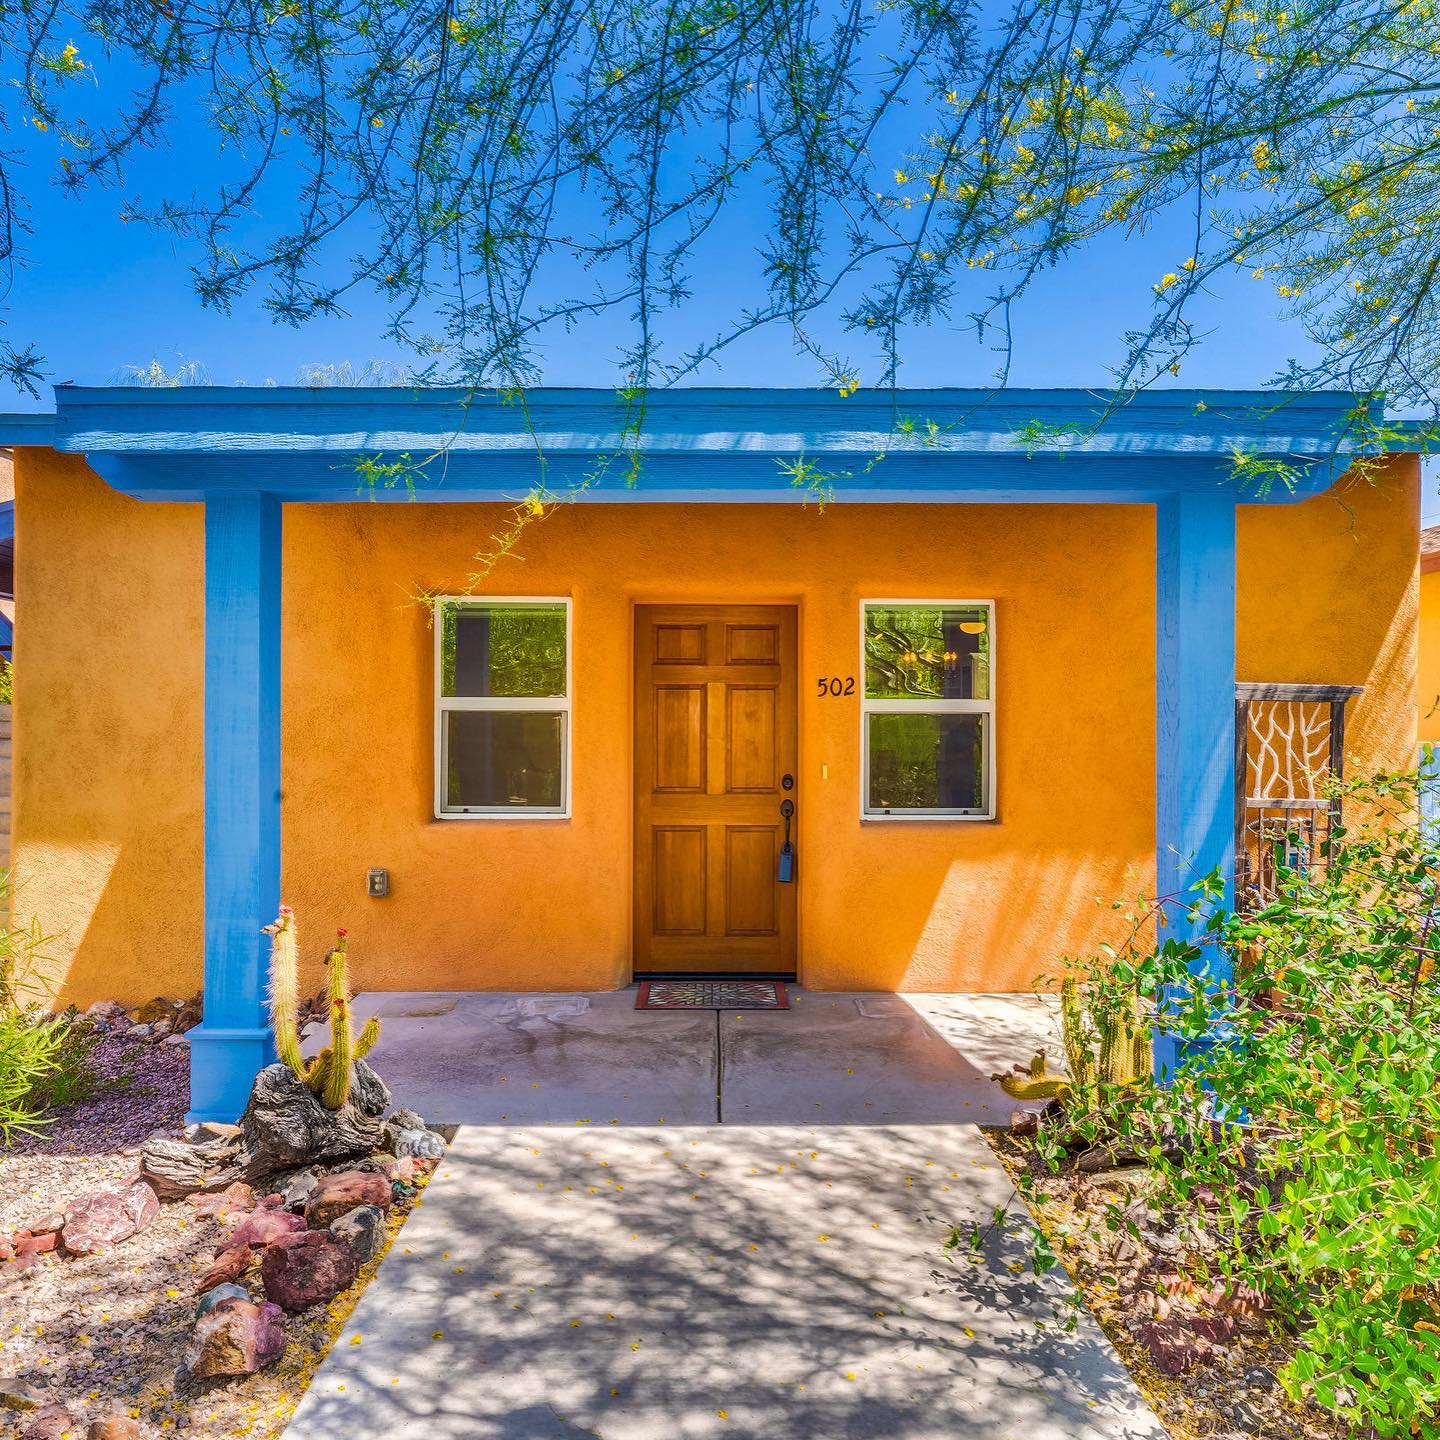 Armory Park Yellow House in Tucson Photo via @tucsongolfliving